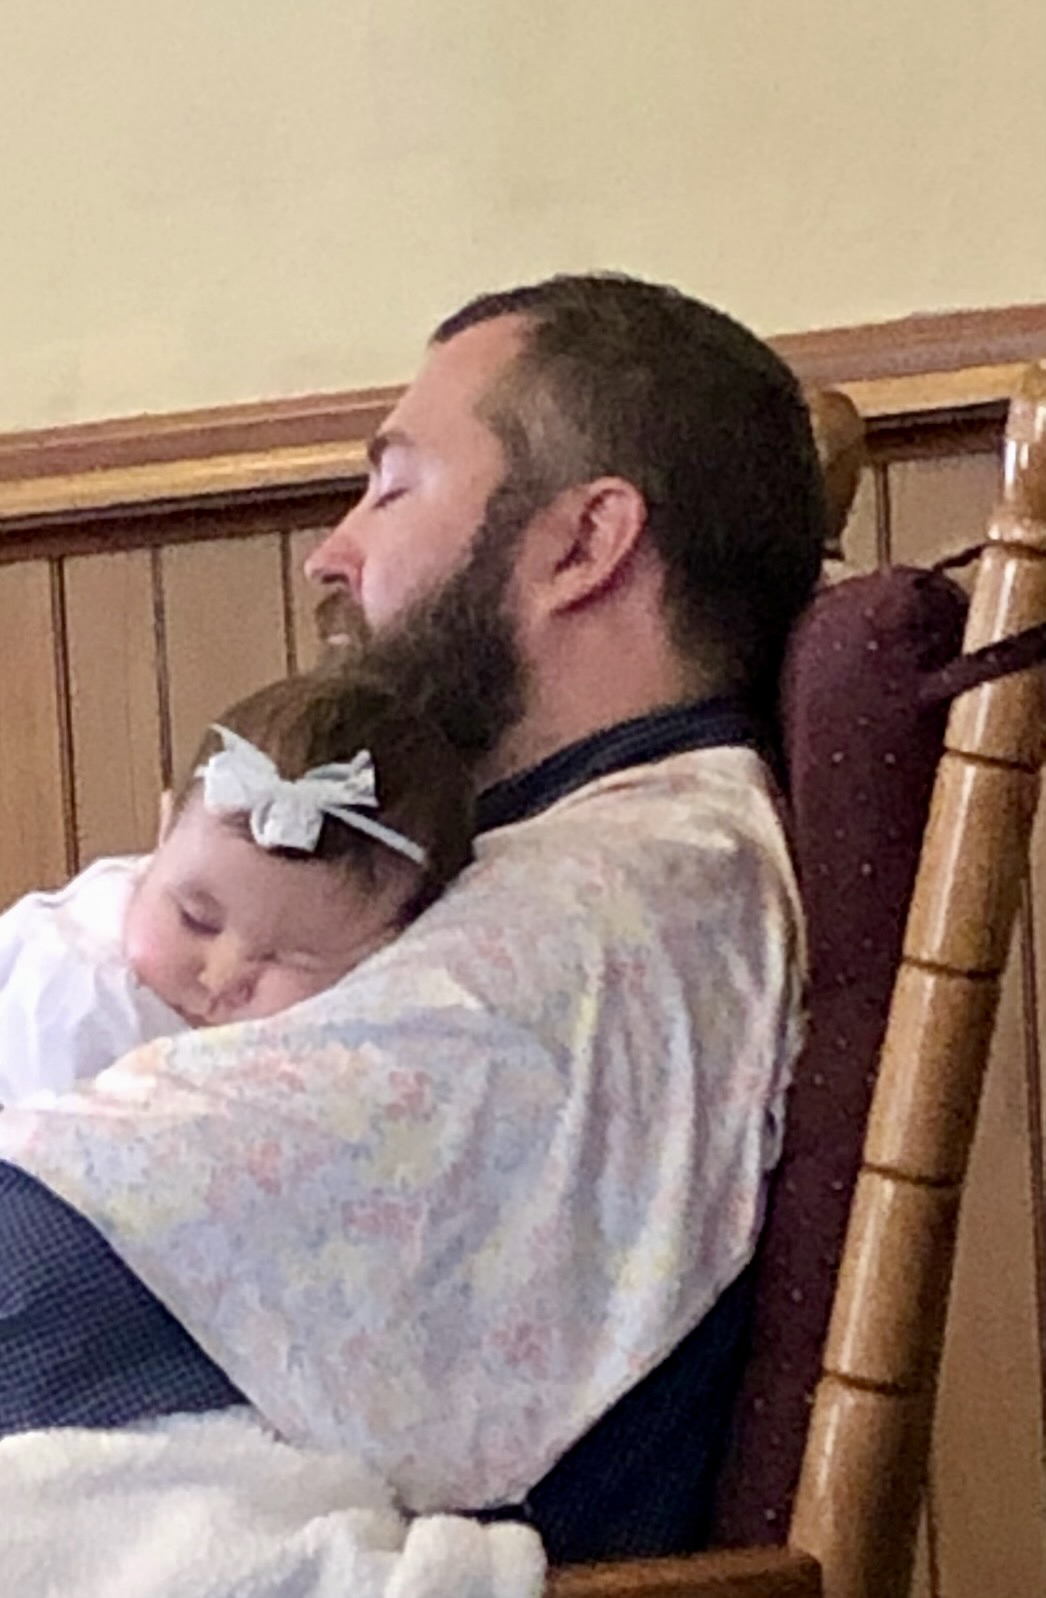 Napping during church